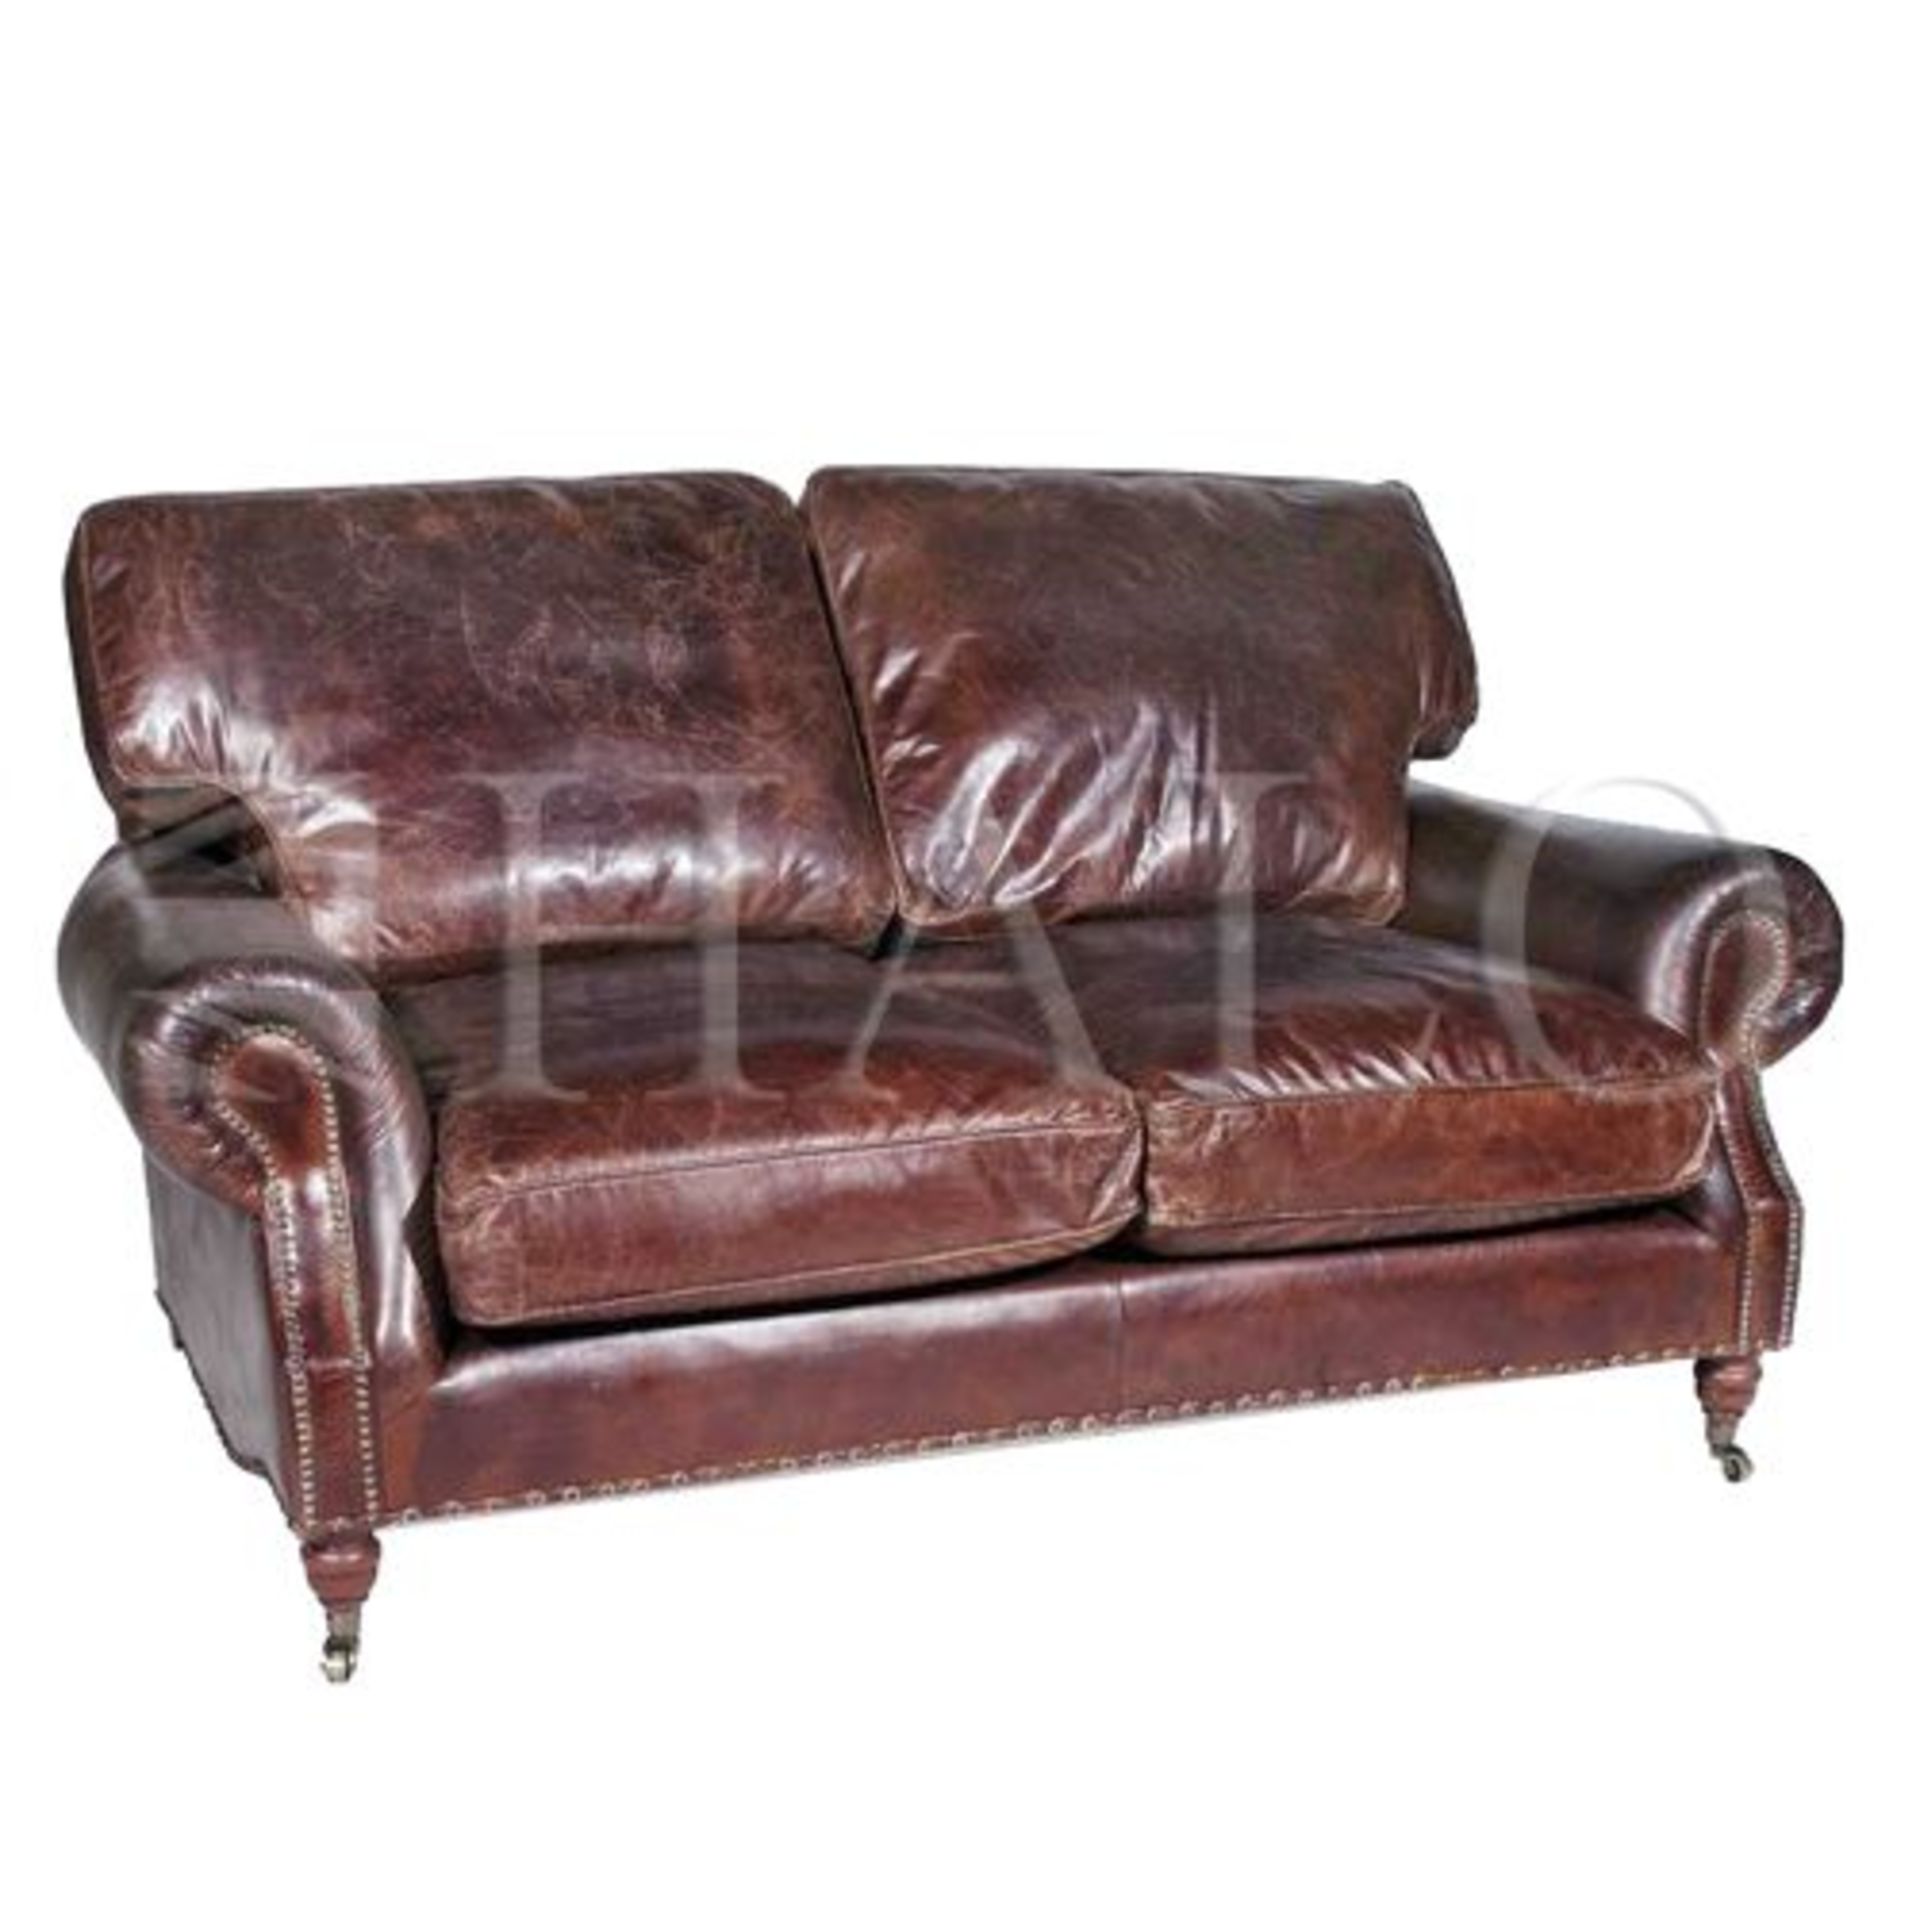 Balmoral 2 Seater A Contemporary Take On Traditional Chesterfield Design The Balmoral Sofa Blends